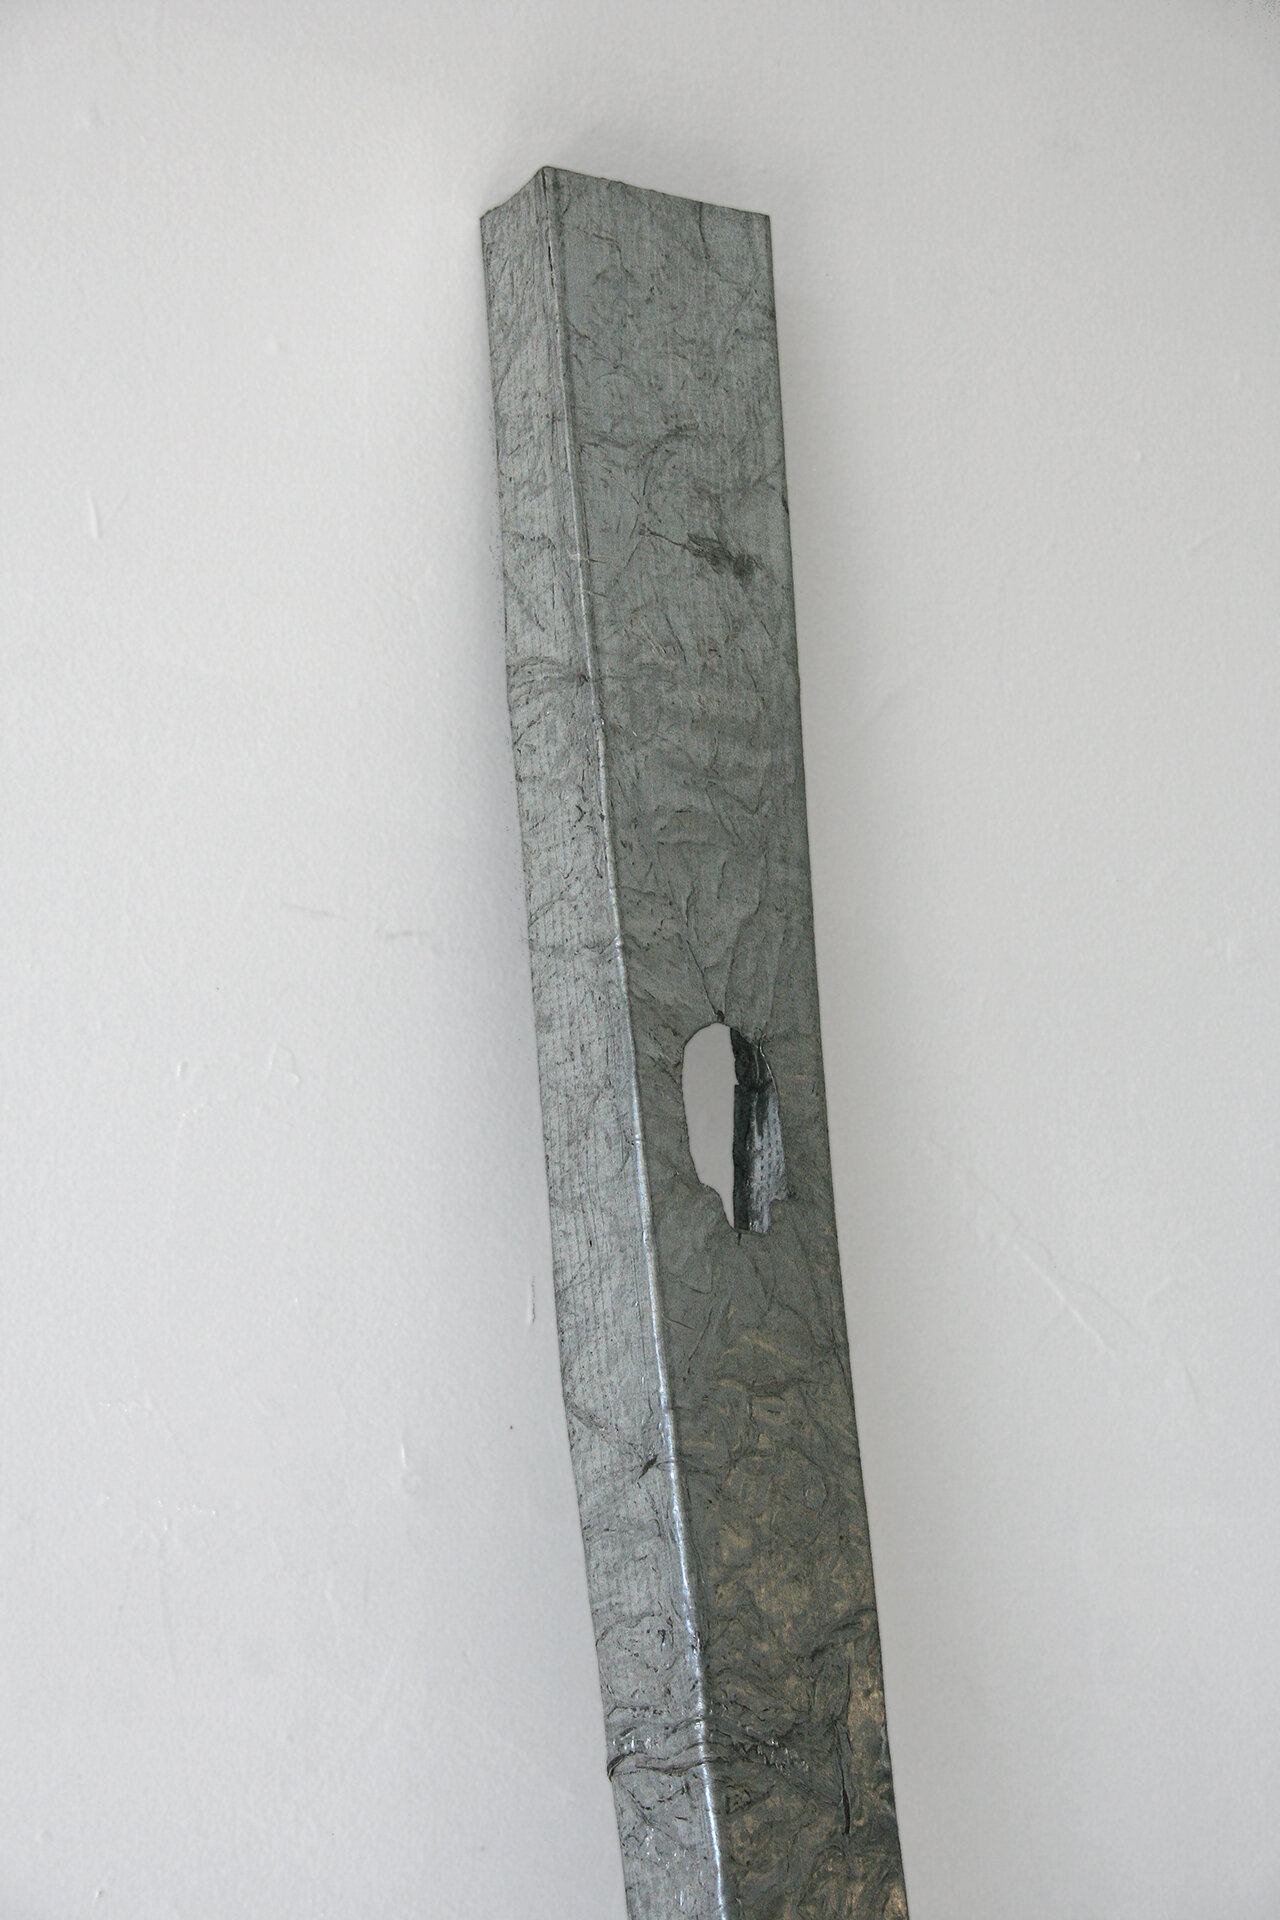 crooked timber, 2008